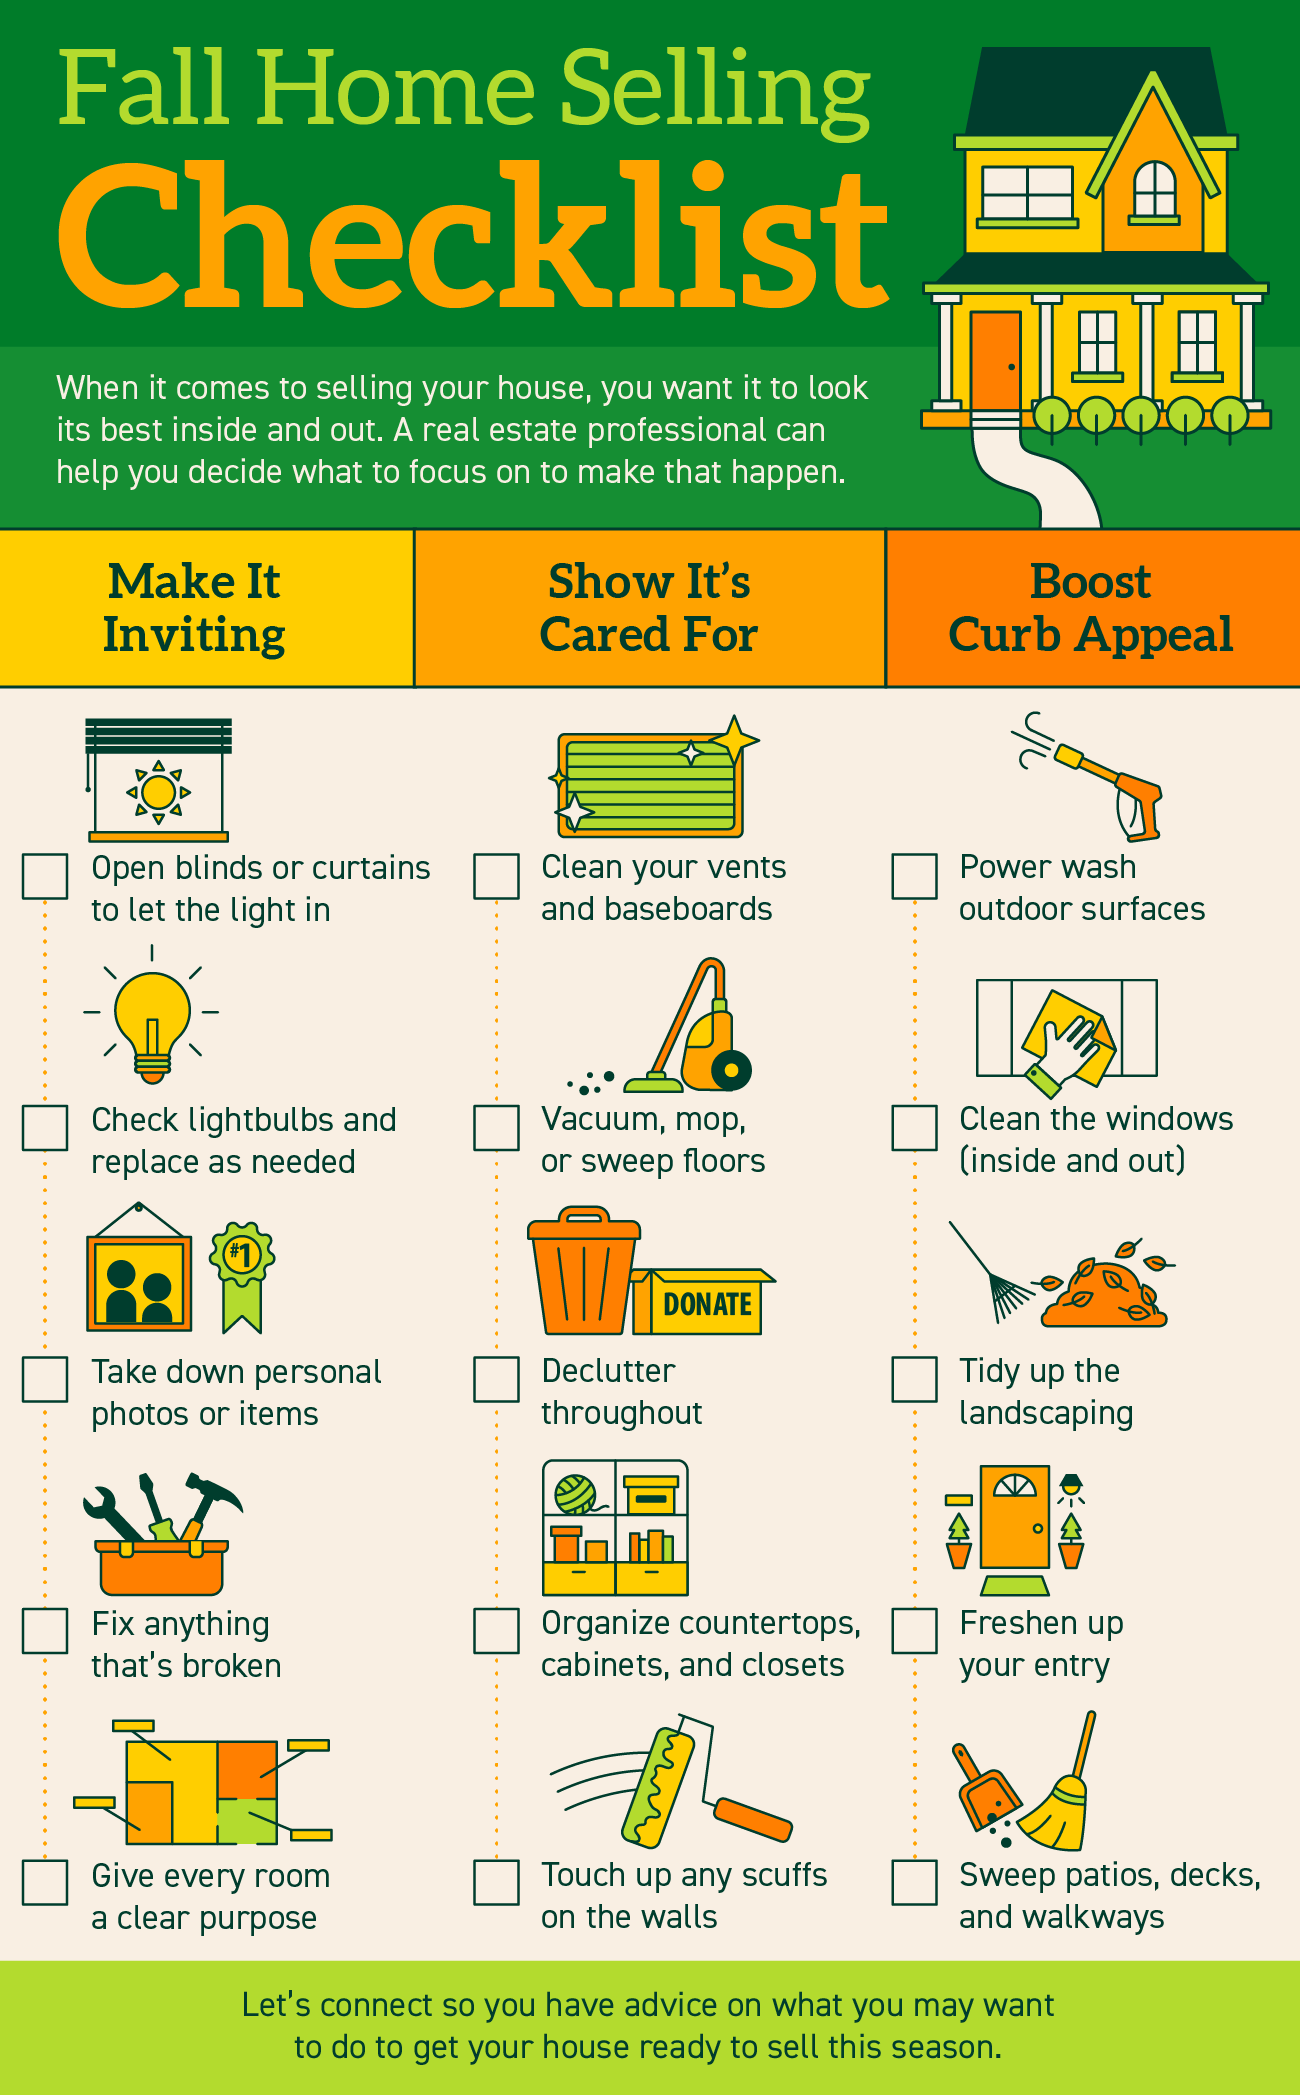 Fall Home Selling Checklist [INFOGRAPHIC] | Simplifying The Market